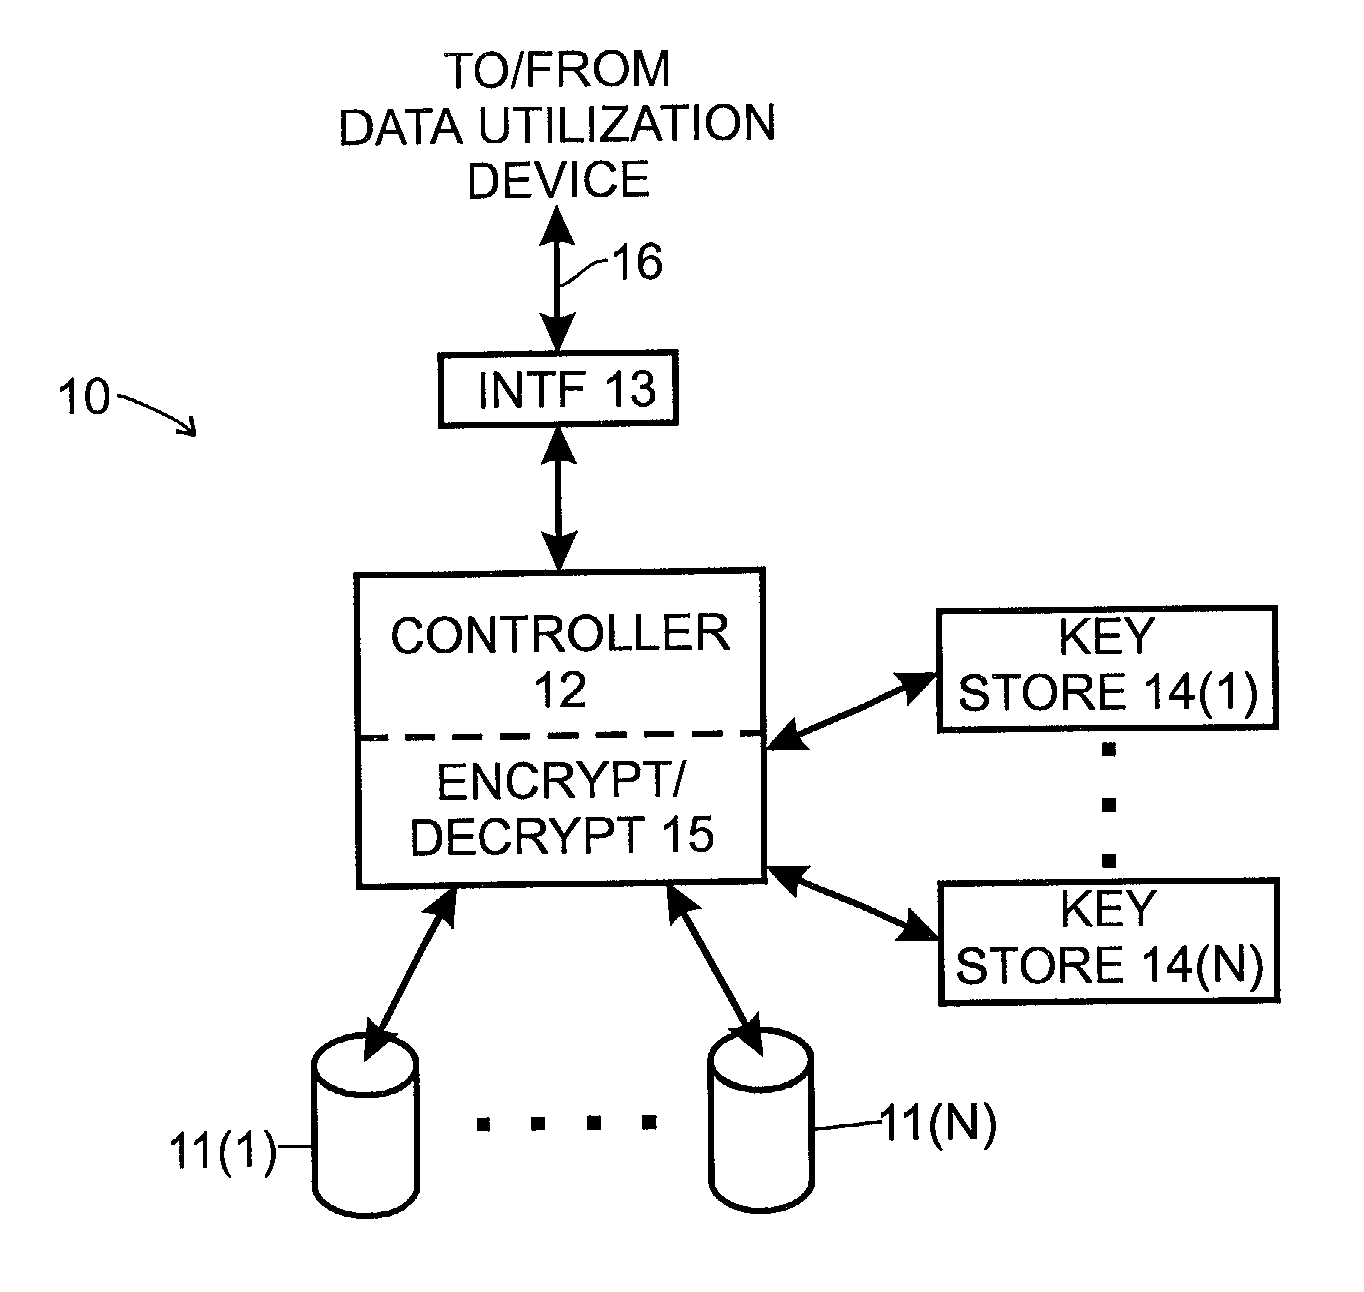 System and method that provides for the efficient and effective sanitizing of disk storage units and the like